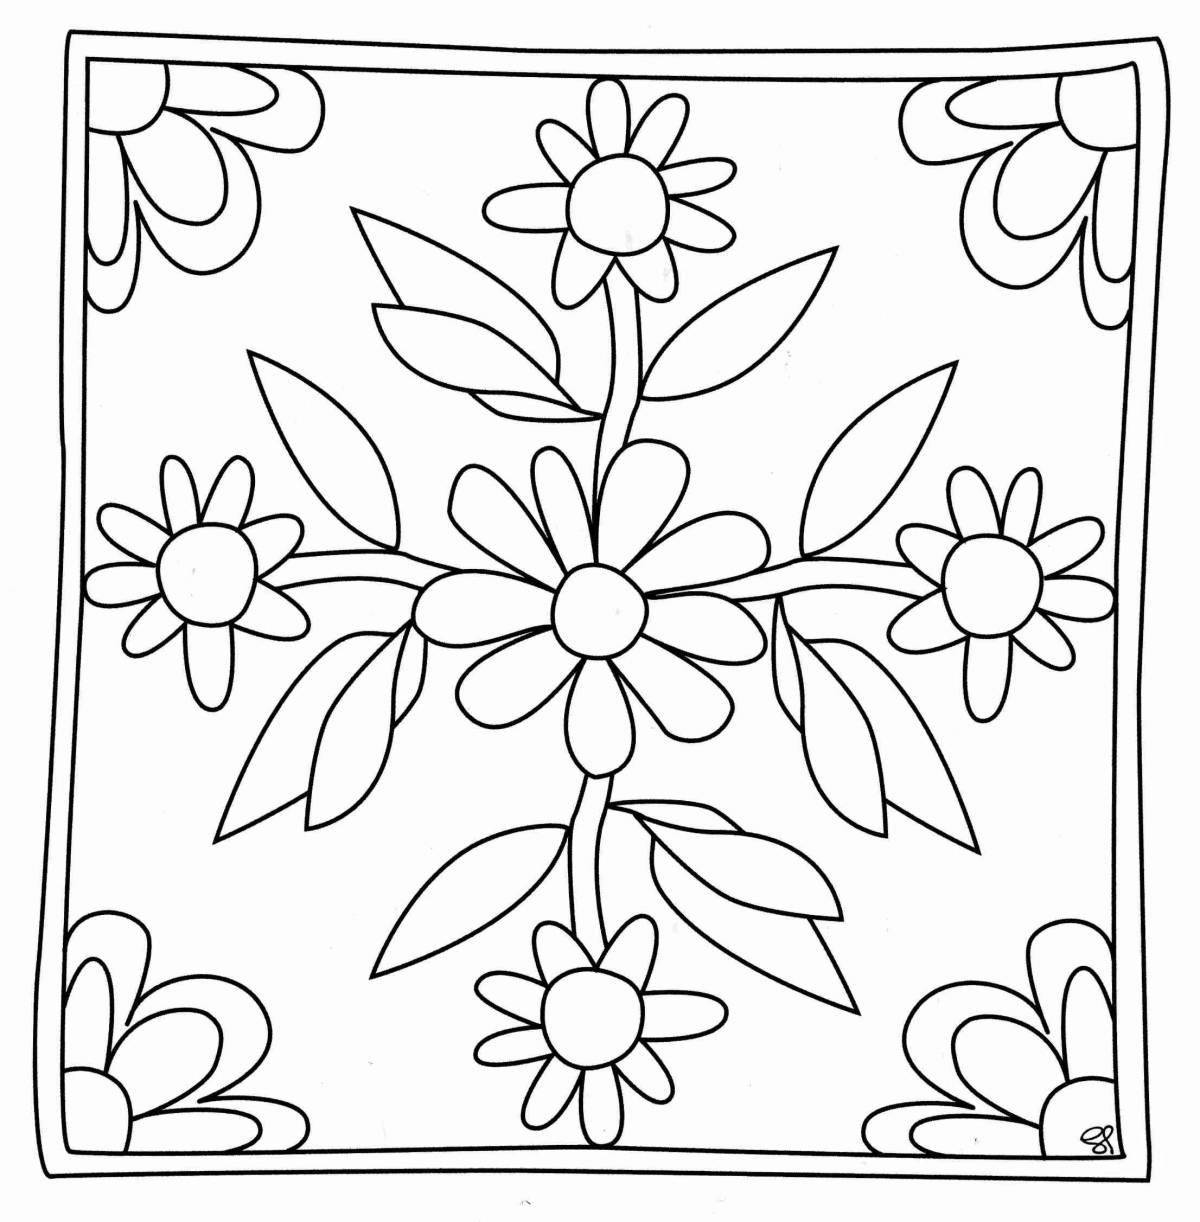 Fun coloring pages for babies